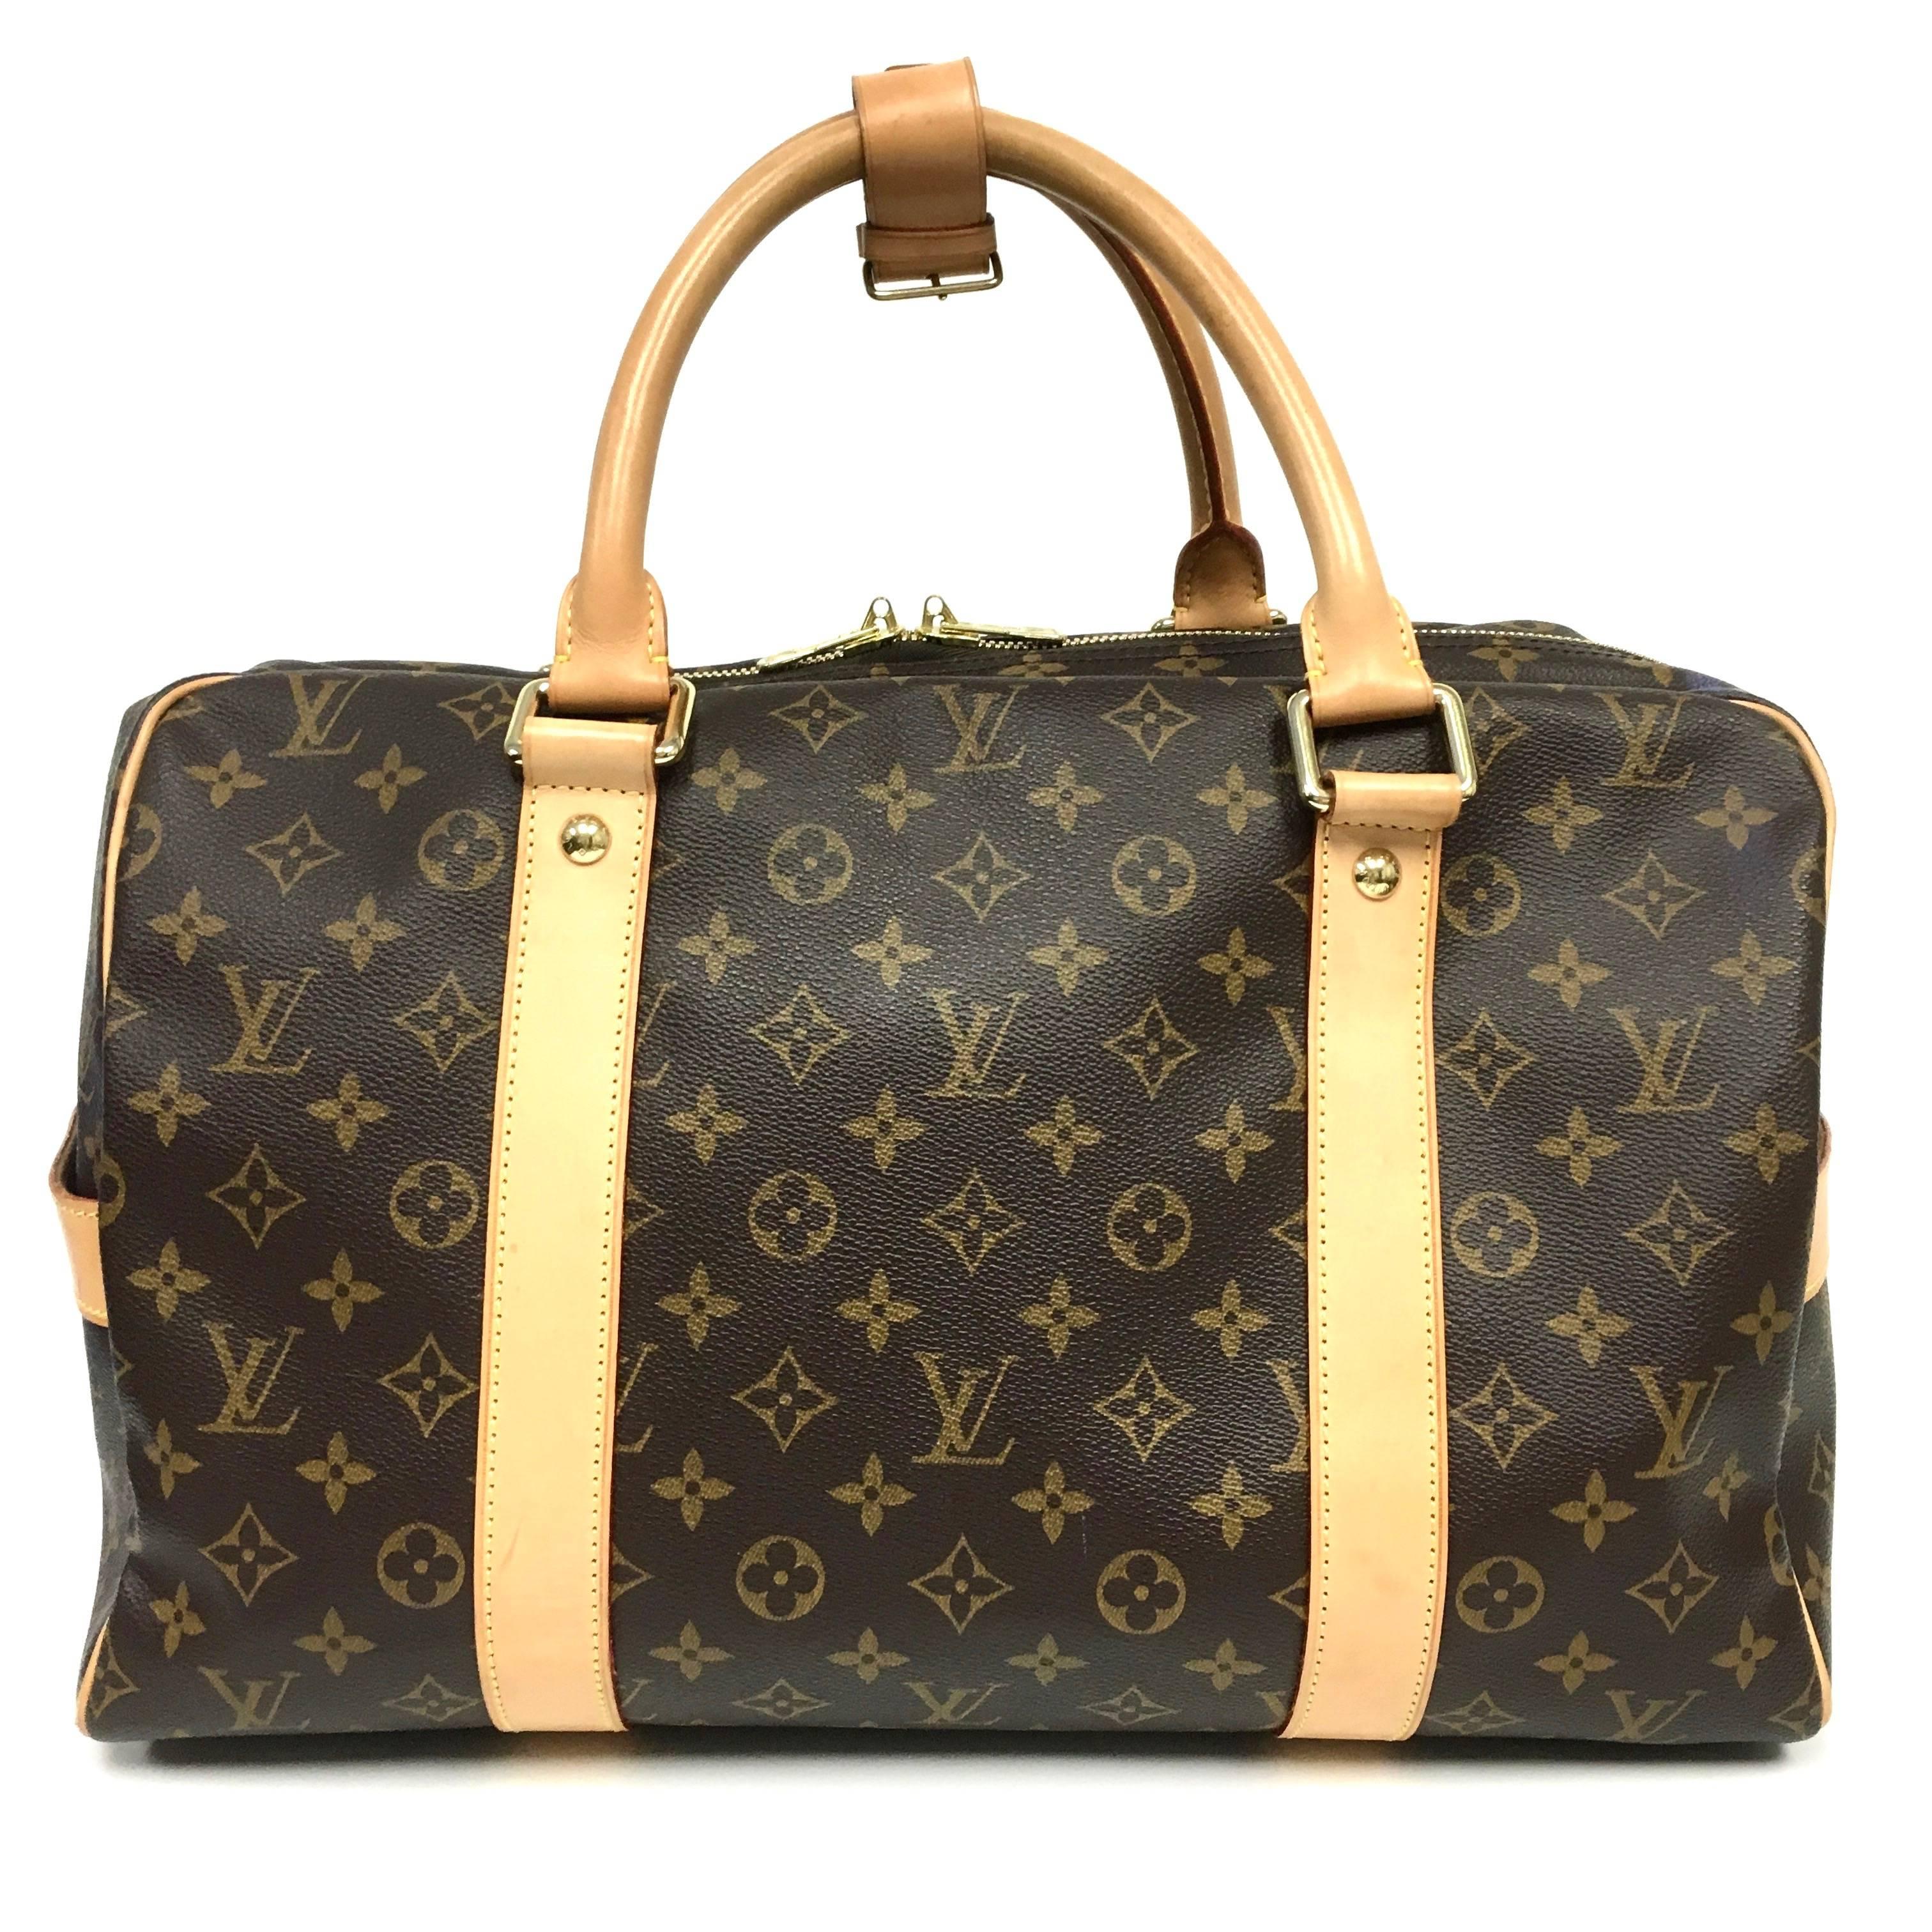 With a nod to the Keepall, this multi-purpose bag is styled in Monogram canvas. It offers a spacious interior and a padlockable closure. It is ideal as a sports or weekend bag. Crafted of classic Louis Vuitton monogram on toile canvas and features